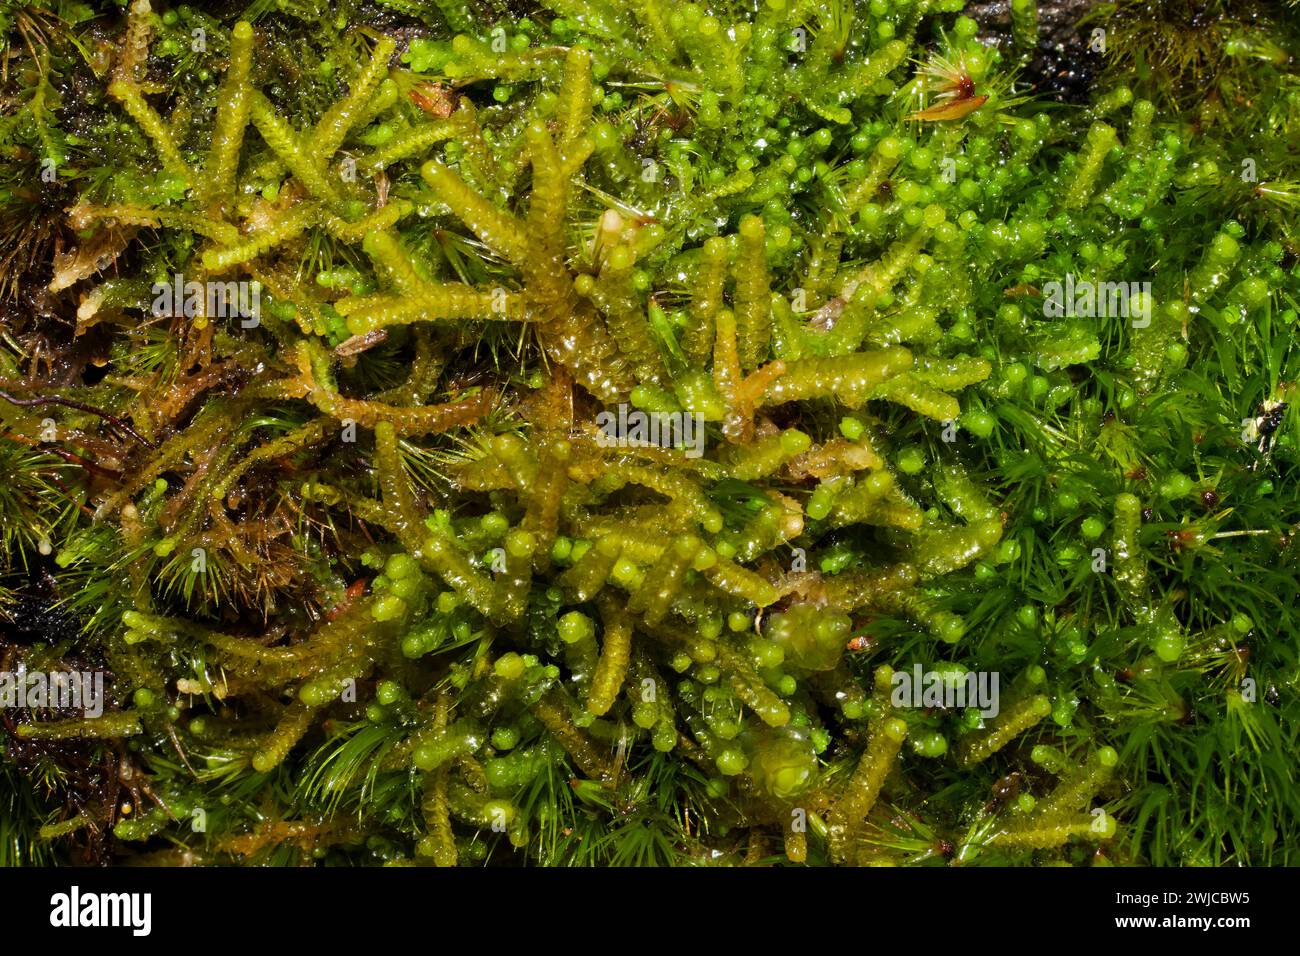 Tritomaria quinquedentata (Lyon’s Notchwort) is a liverwort found, forexample,on mossy slopes in woodlands. It is confined to the Northern Hemisphere. Stock Photo